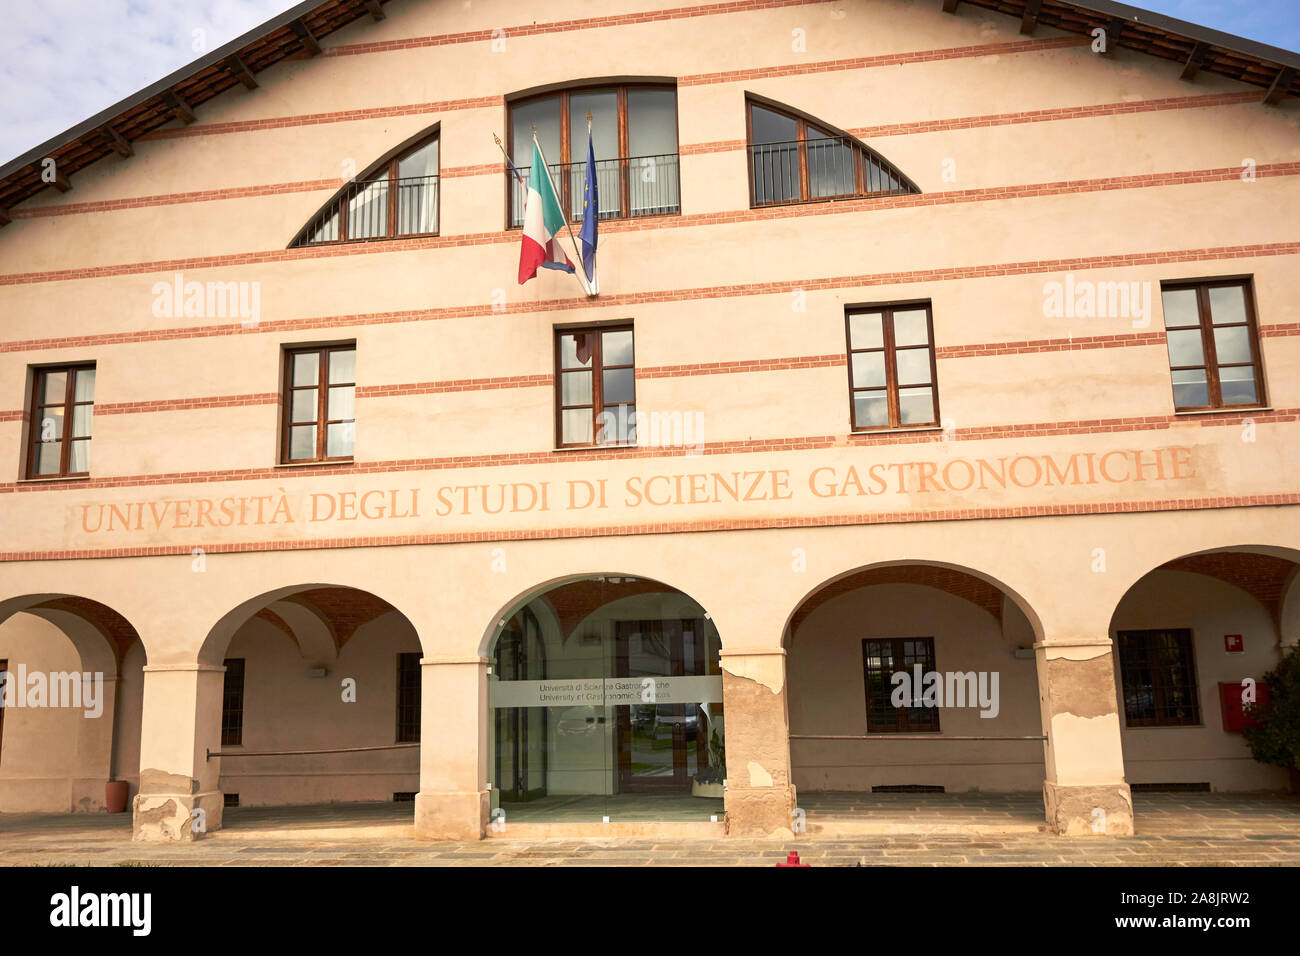 The main entrance to the University of Gastronomic Sciences at Pollenzo, Bra, Piemonte, Italy Stock Photo